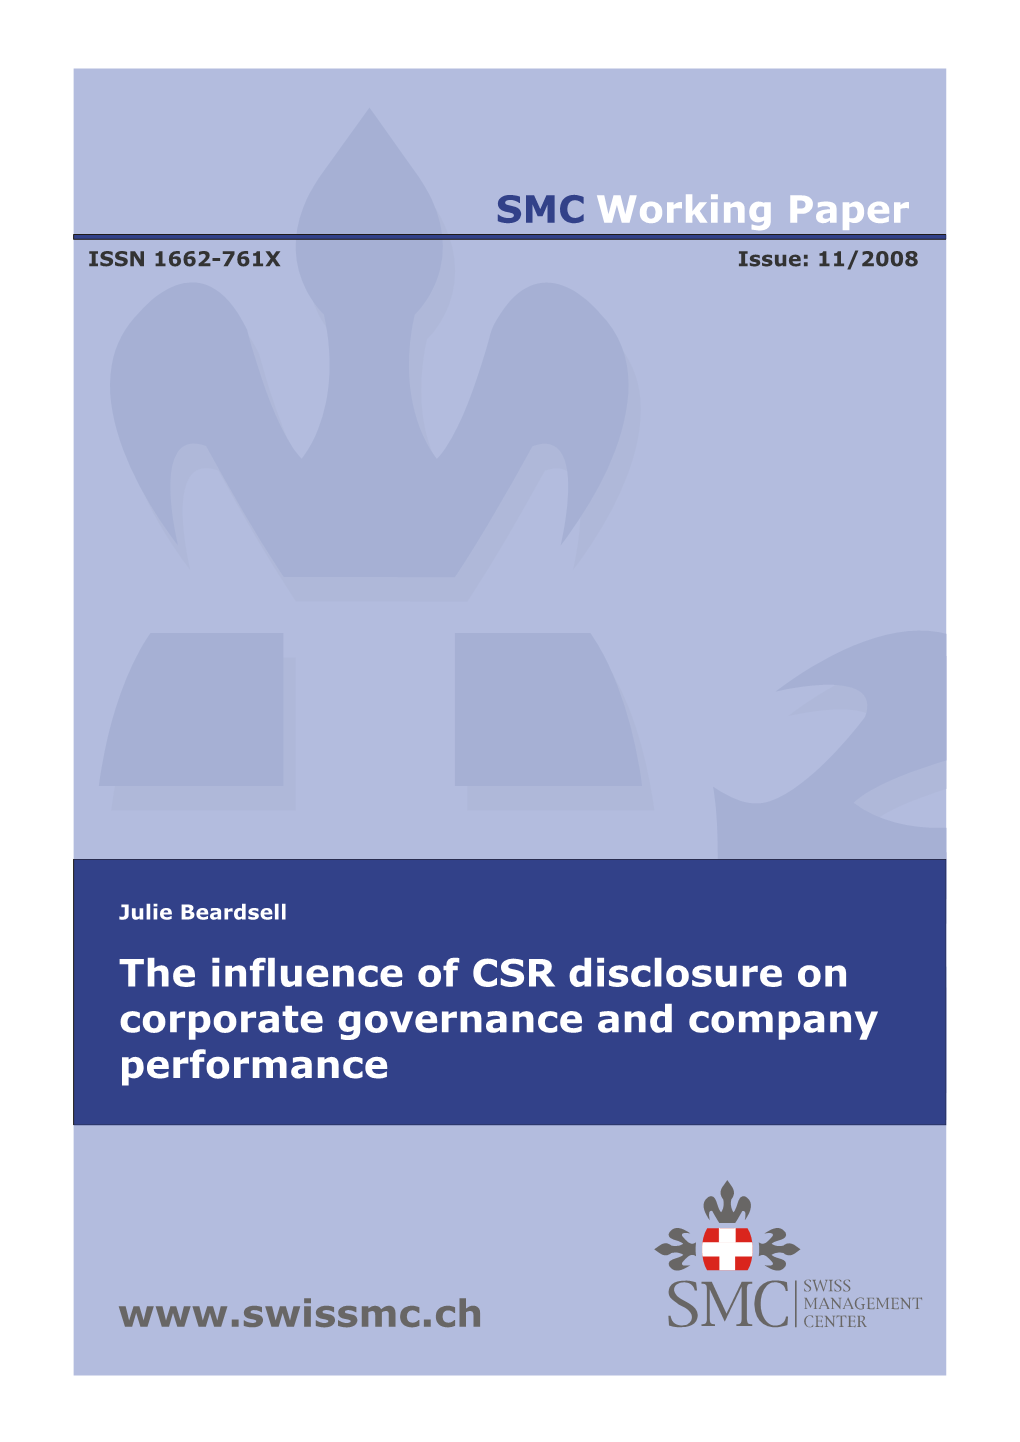 The Influence of CSR Disclosure on Corporate Governance and Company Performance